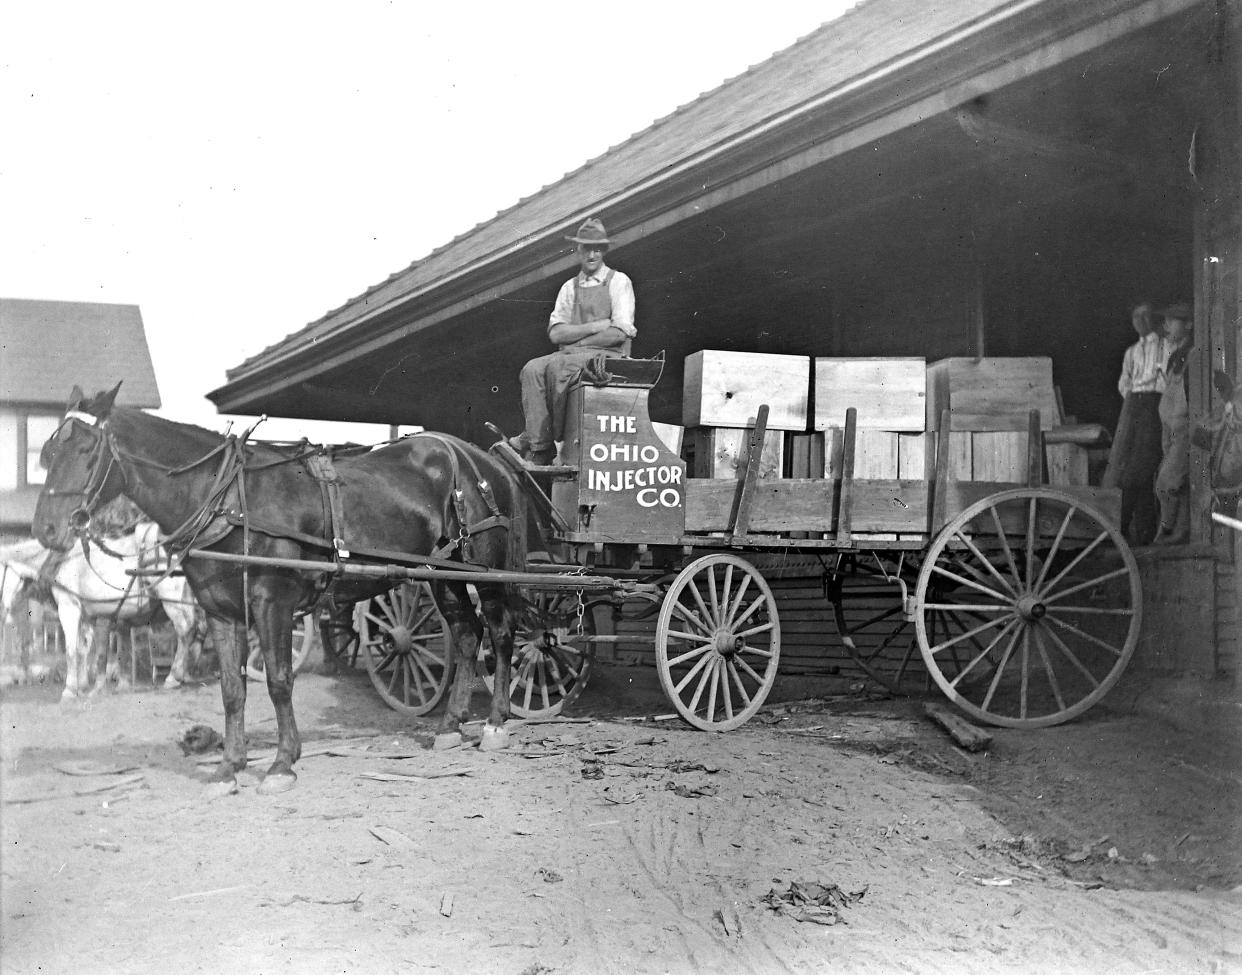 A worker carries a load of crates on a horse-drawn wagon labeled the Ohio Injector Co., a Wadsworth company that manufactured locomotive injectors at the turn of the 20th century. The building appears to be the Erie depot in Wadsworth.